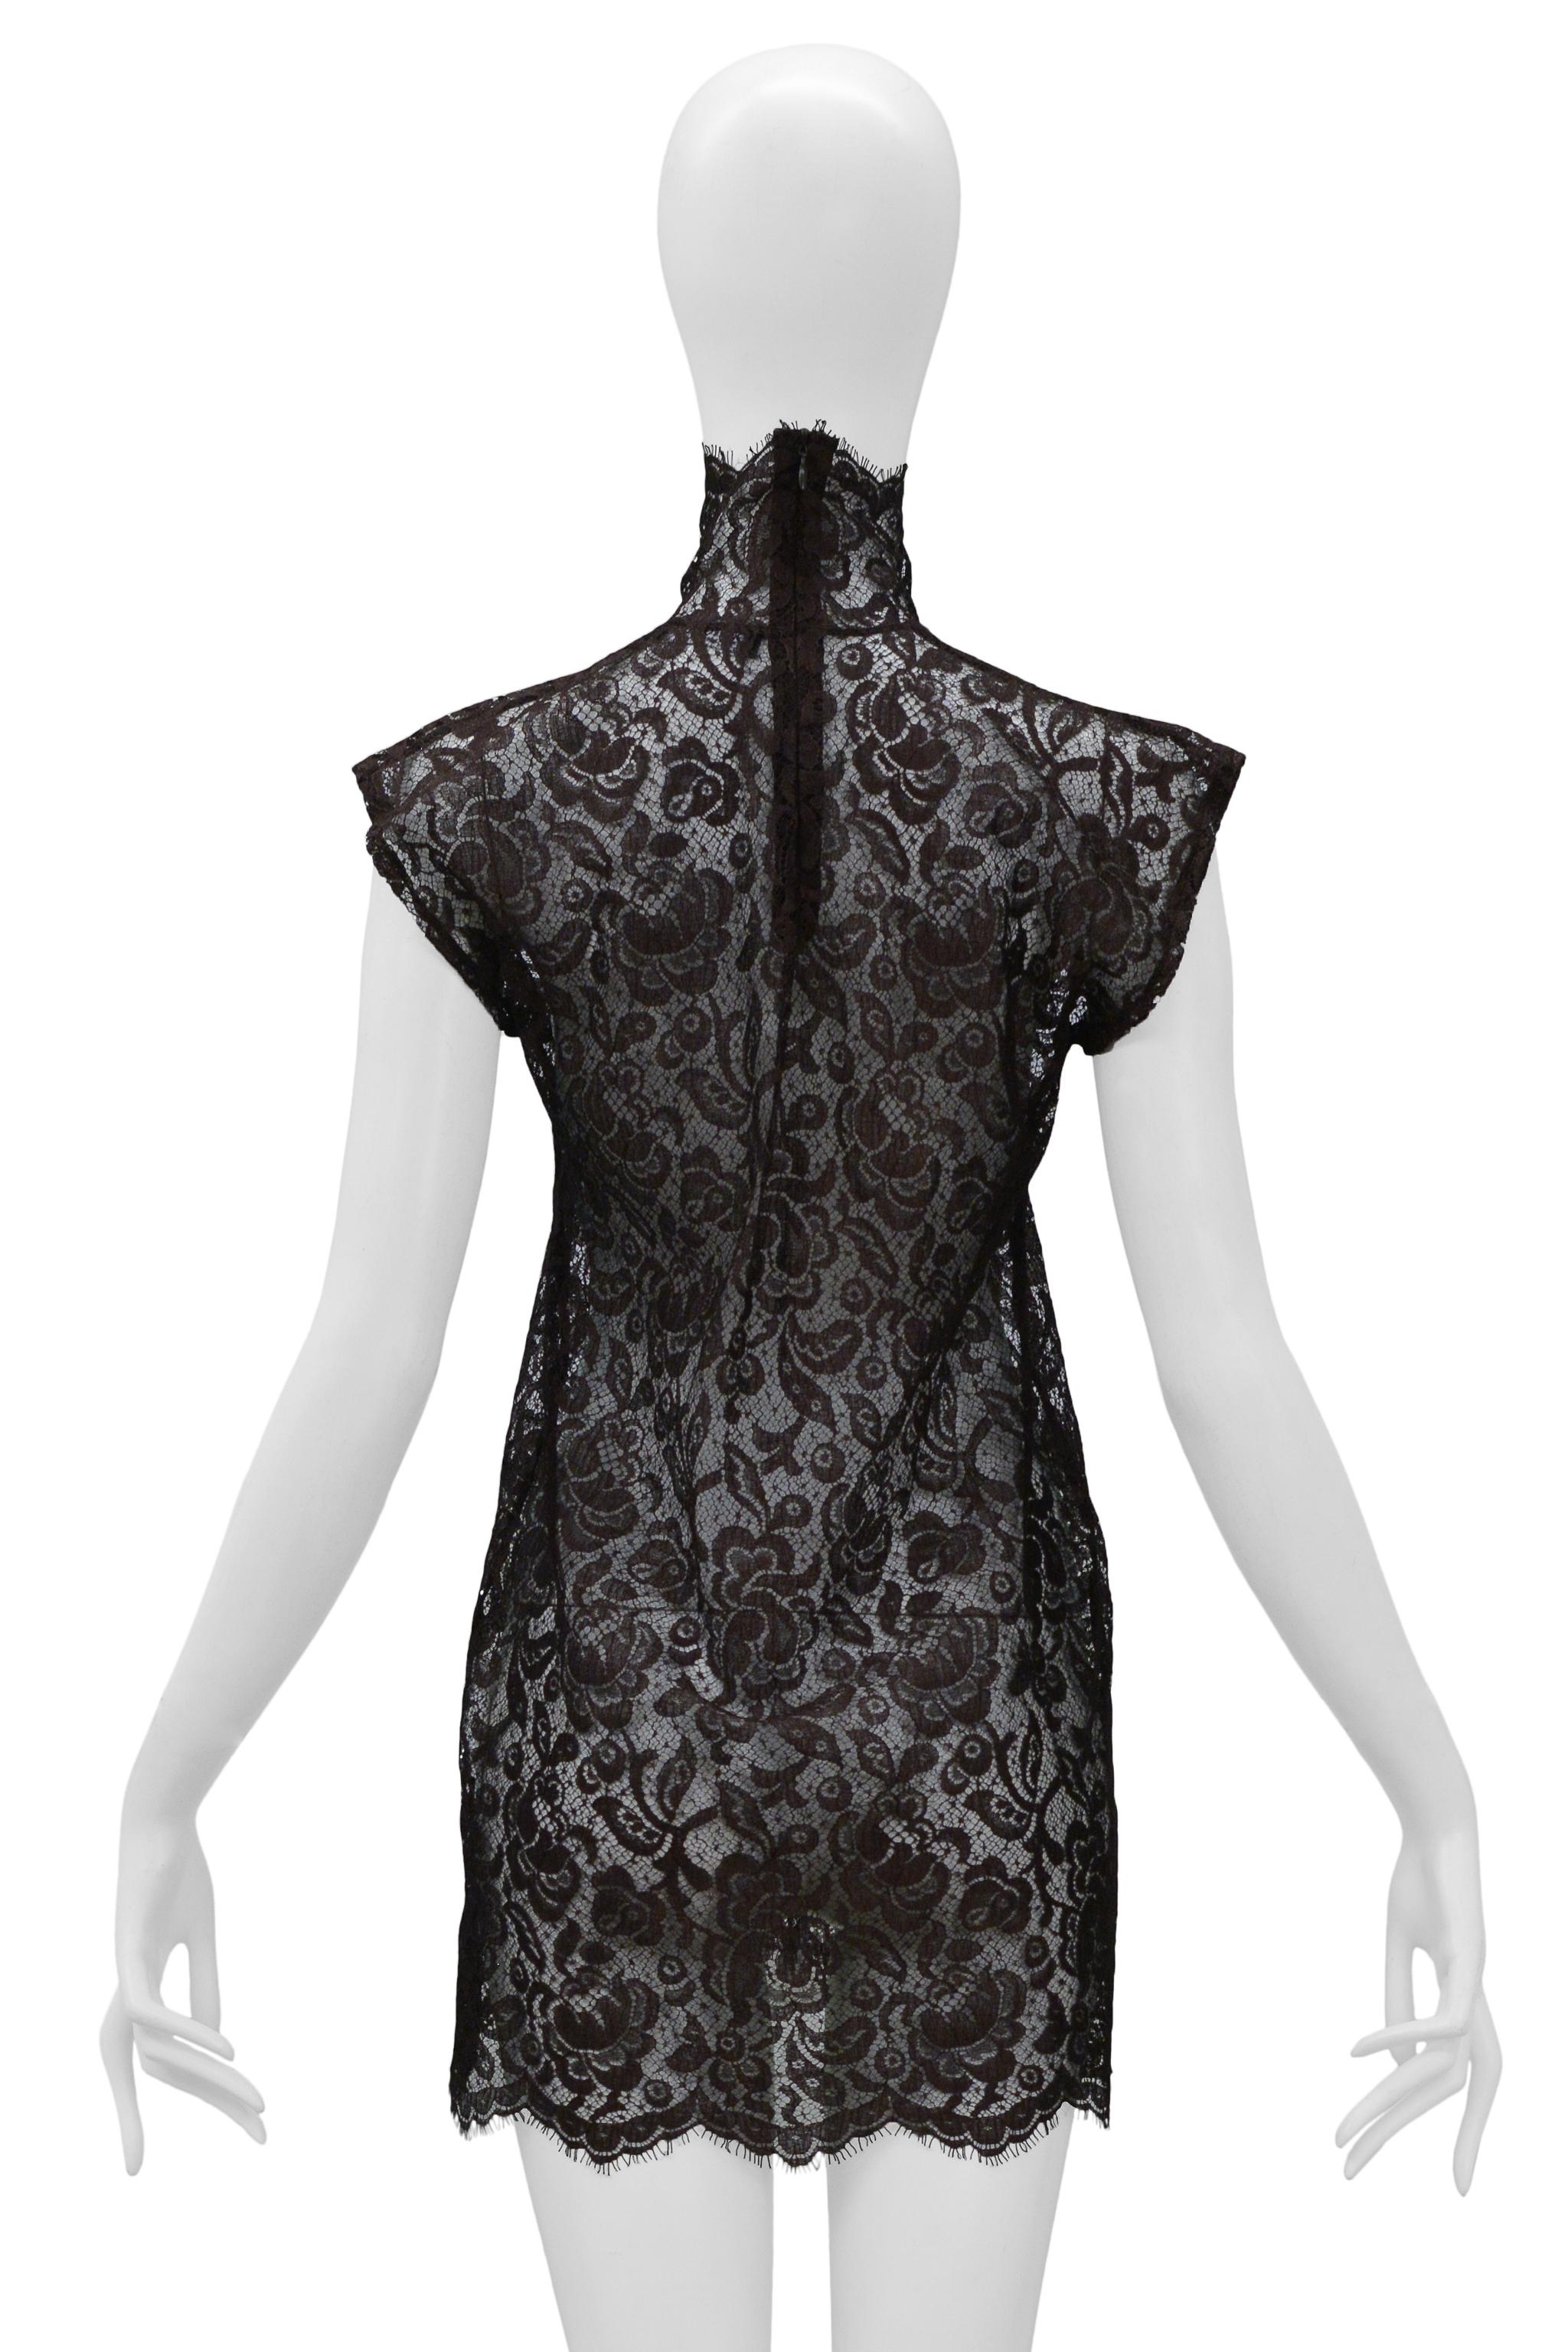 Women's Dolce & Gabbana Brown Lace Mini Dress with High Neck 2001 